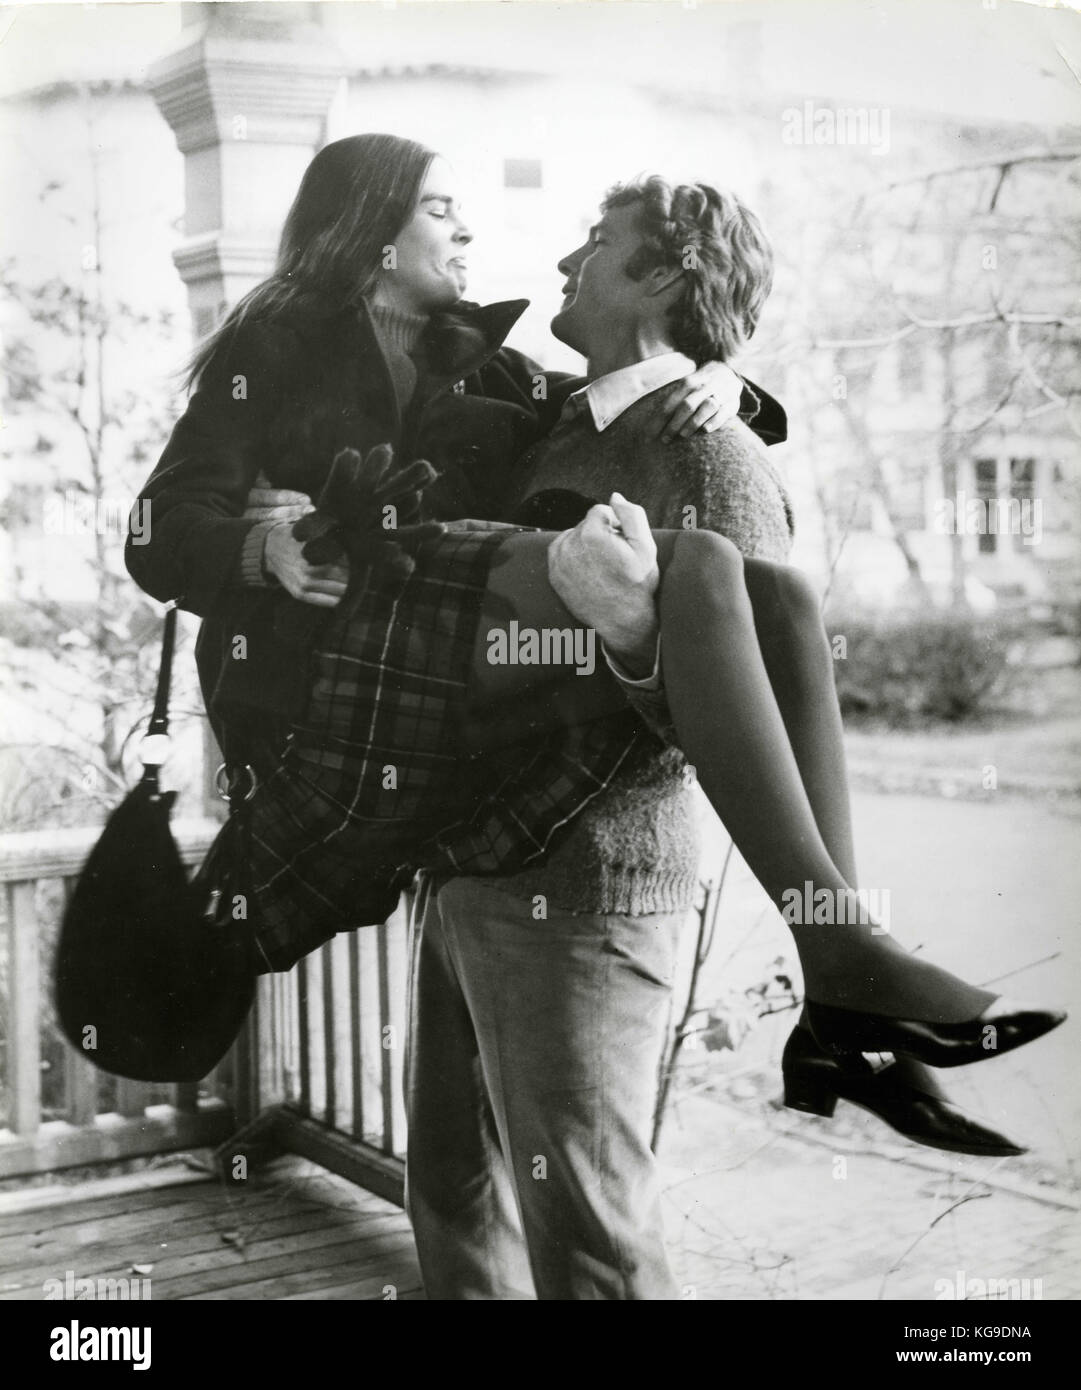 Actors Ryan O' Neal and Ali MacGrow in the movie Love Story, 1970 Stock Photo